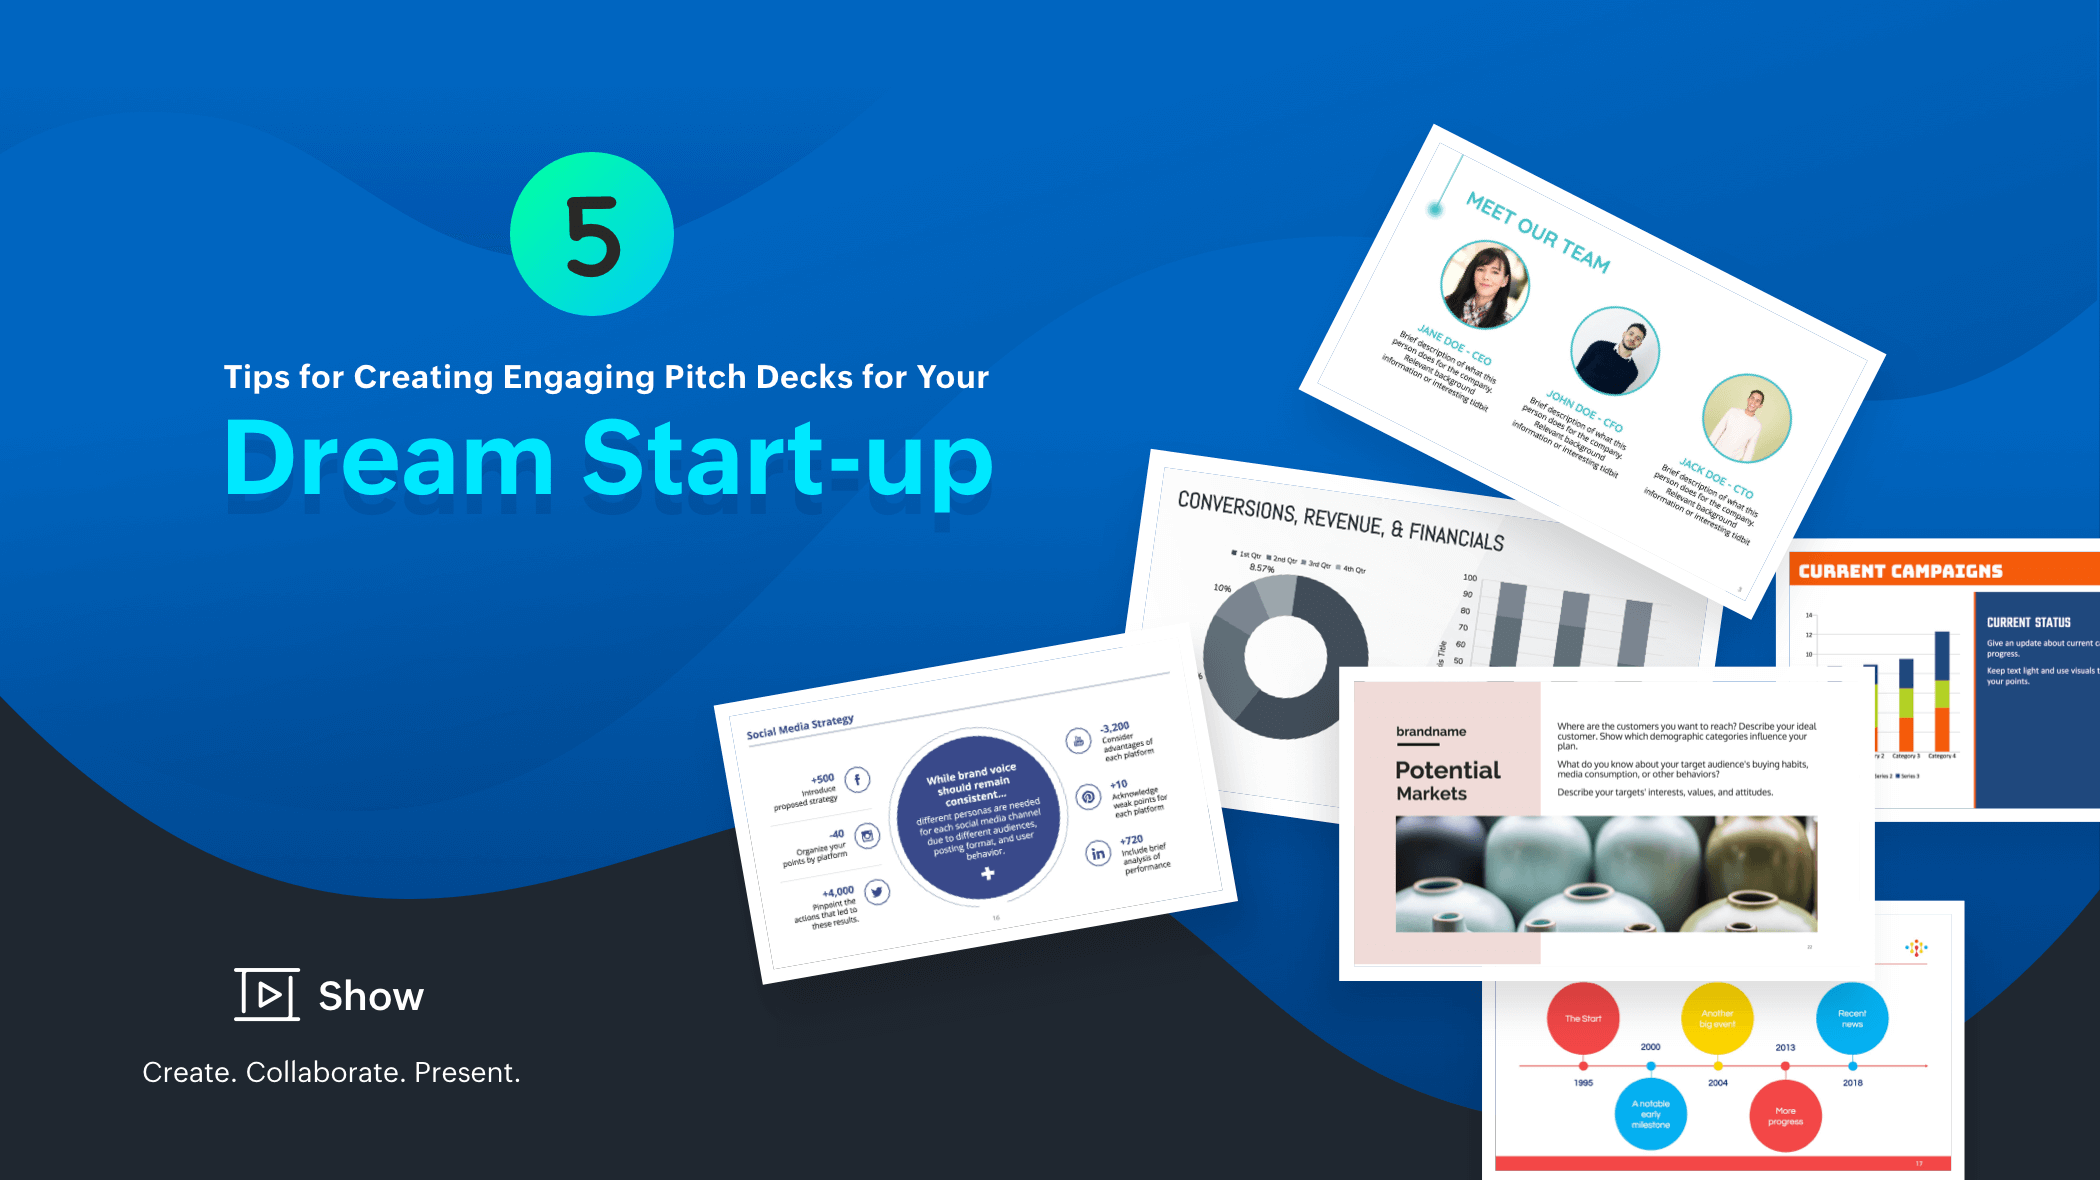 5 tips for creating engaging pitch decks for your dream start-up